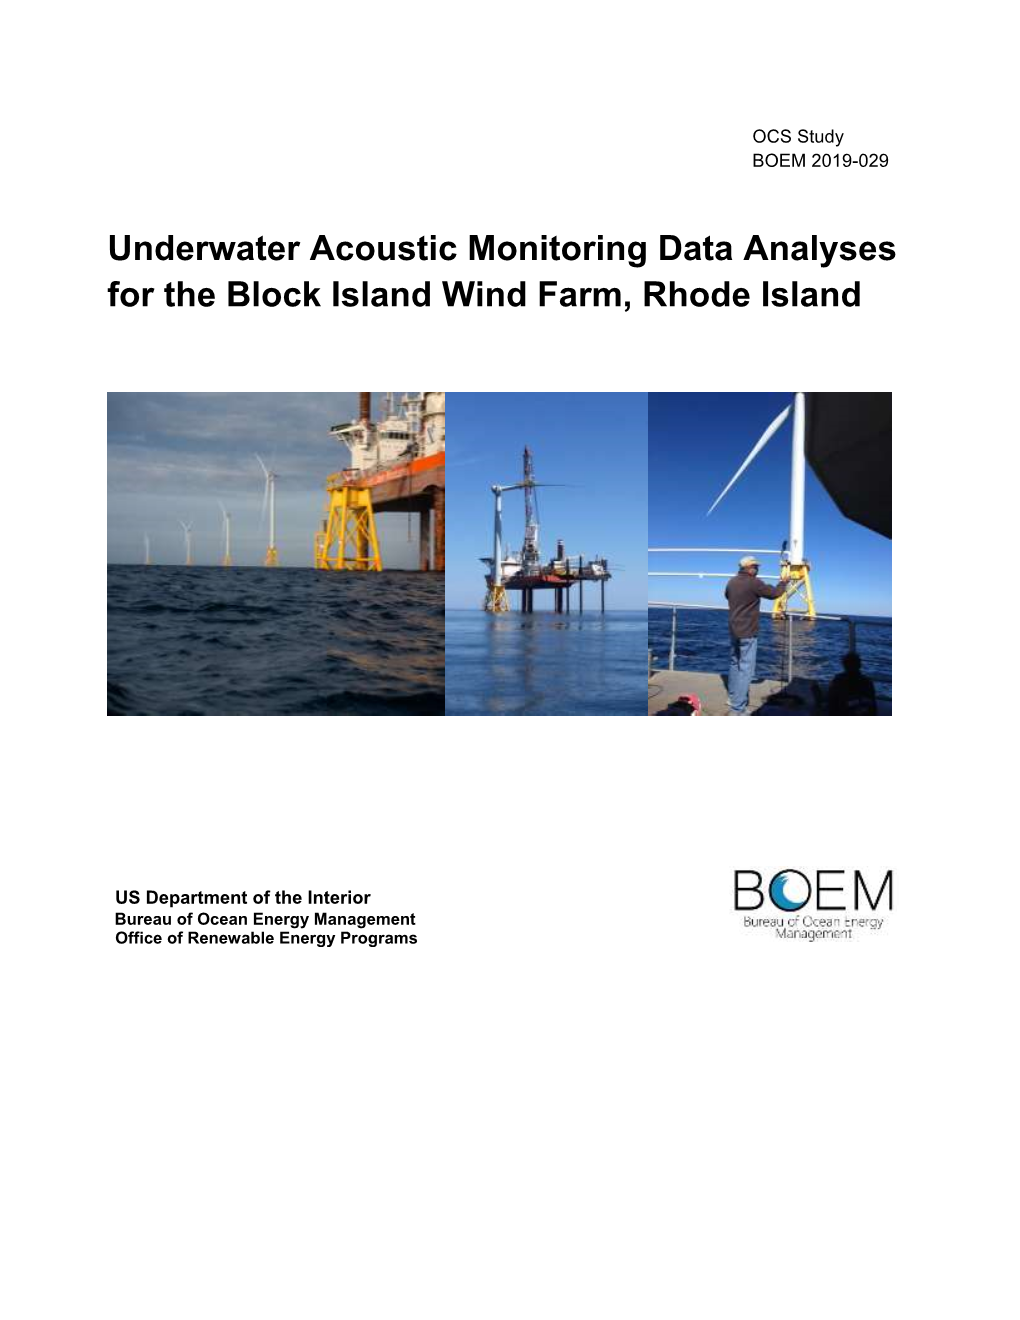 Underwater Acoustic Monitoring Data Analyses for the Block Island Wind Farm, Rhode Island